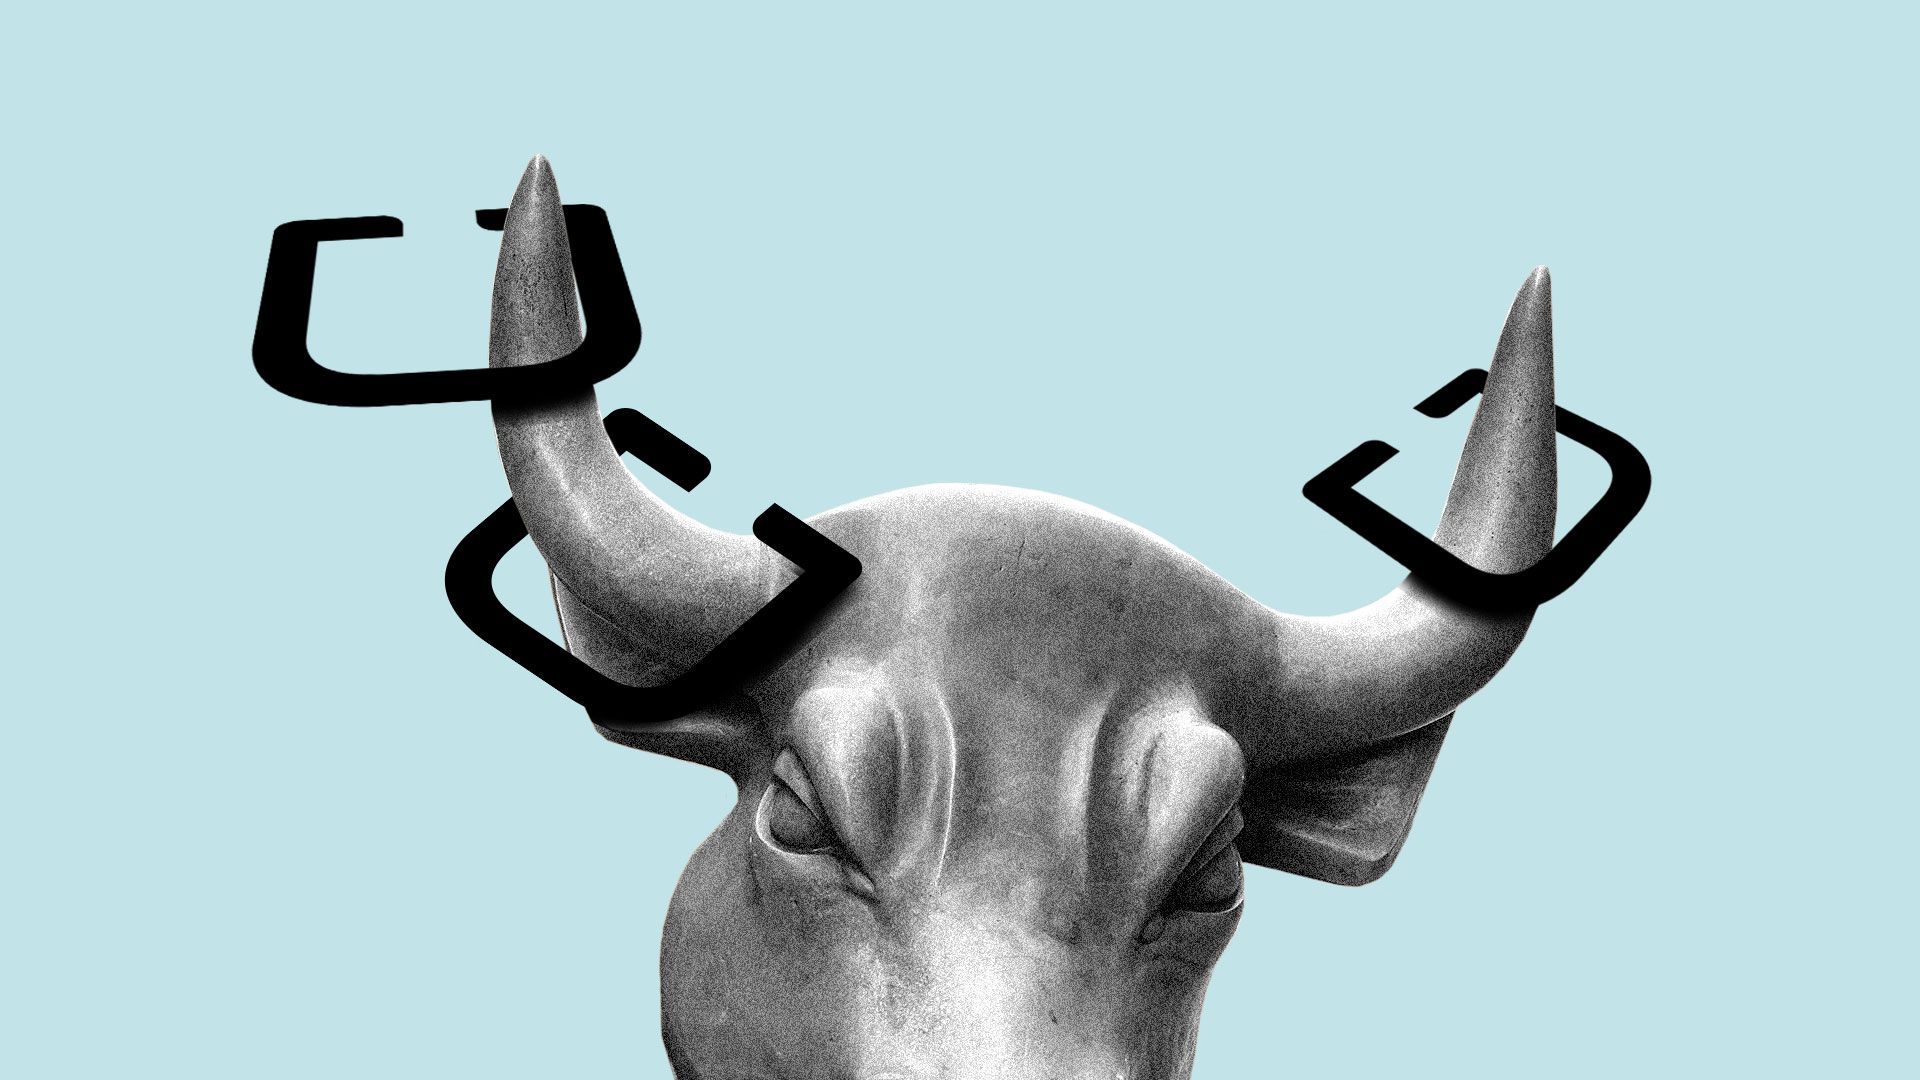 In this illustration, Uber's "U" logo is tossed around the Wall Street bull's horns.